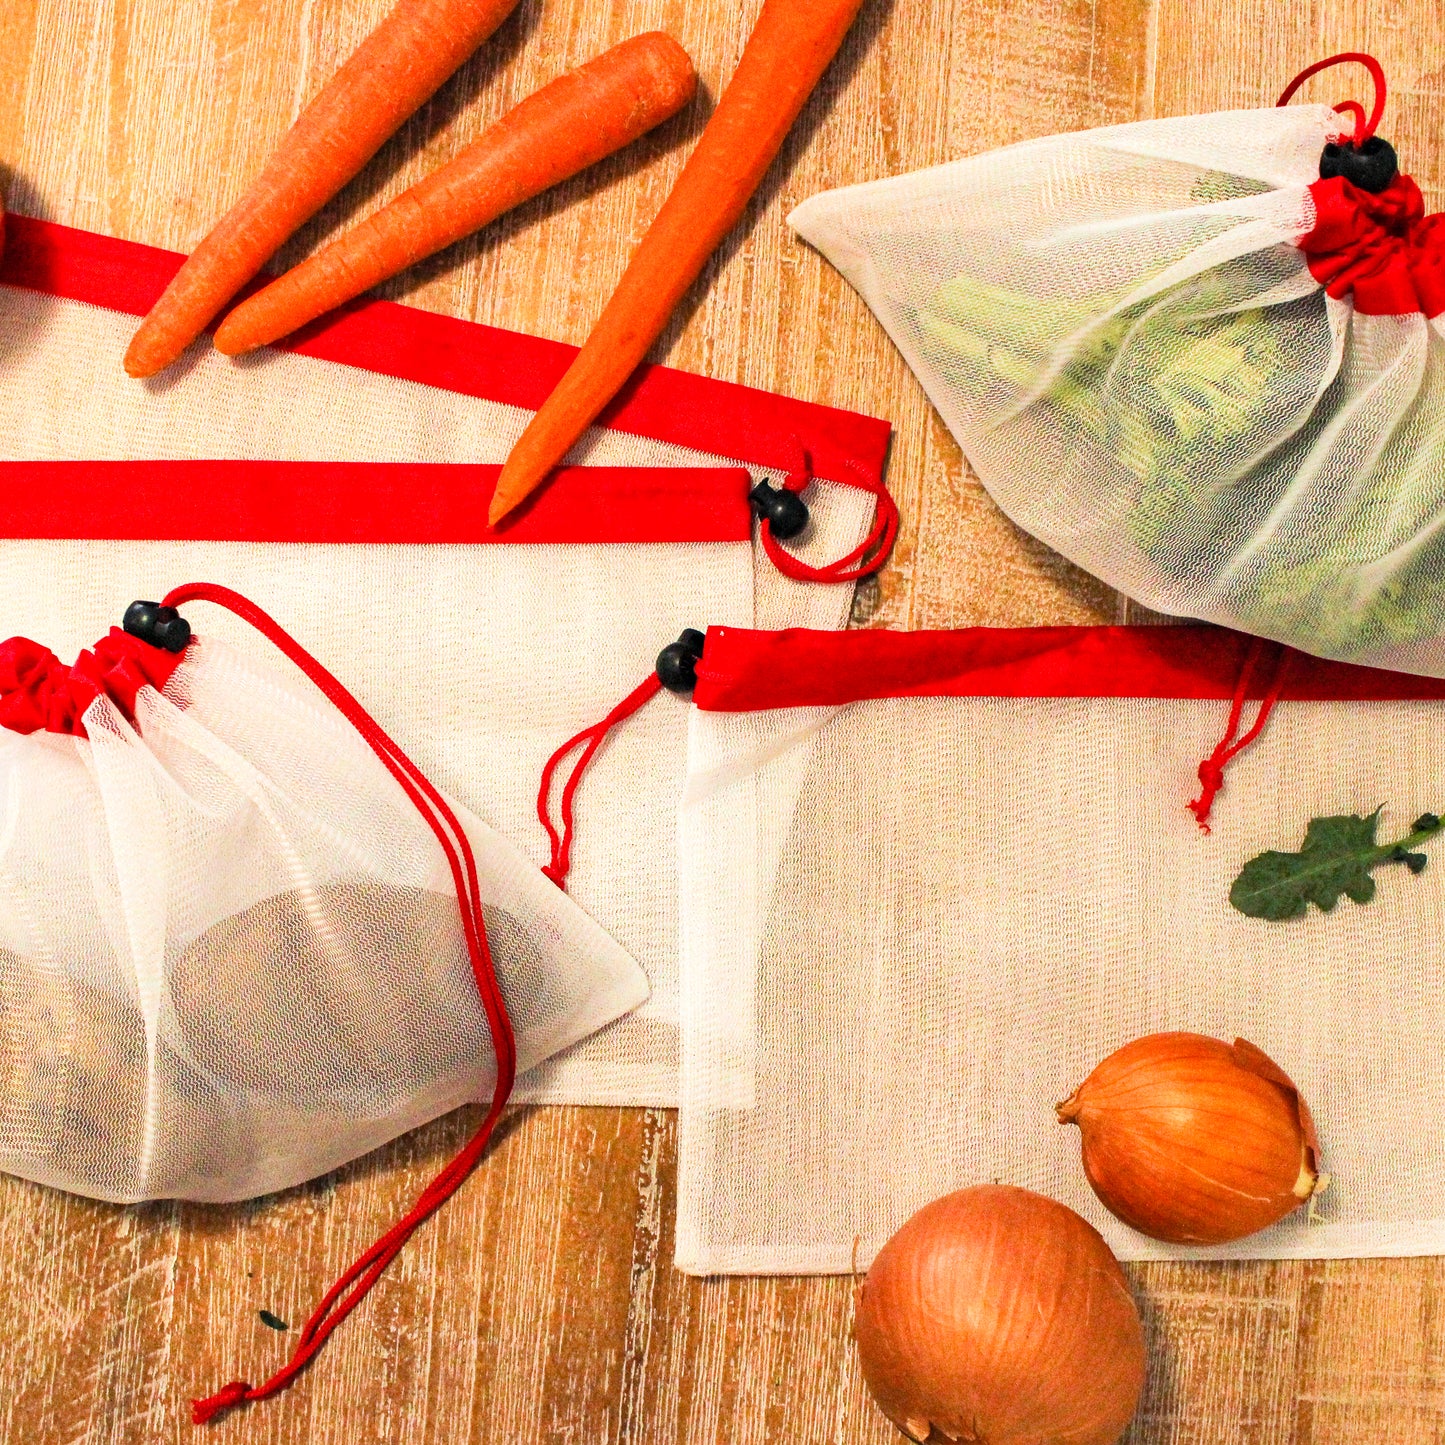 Reusable Produce Bags (ONLY 1 SET LEFT!)